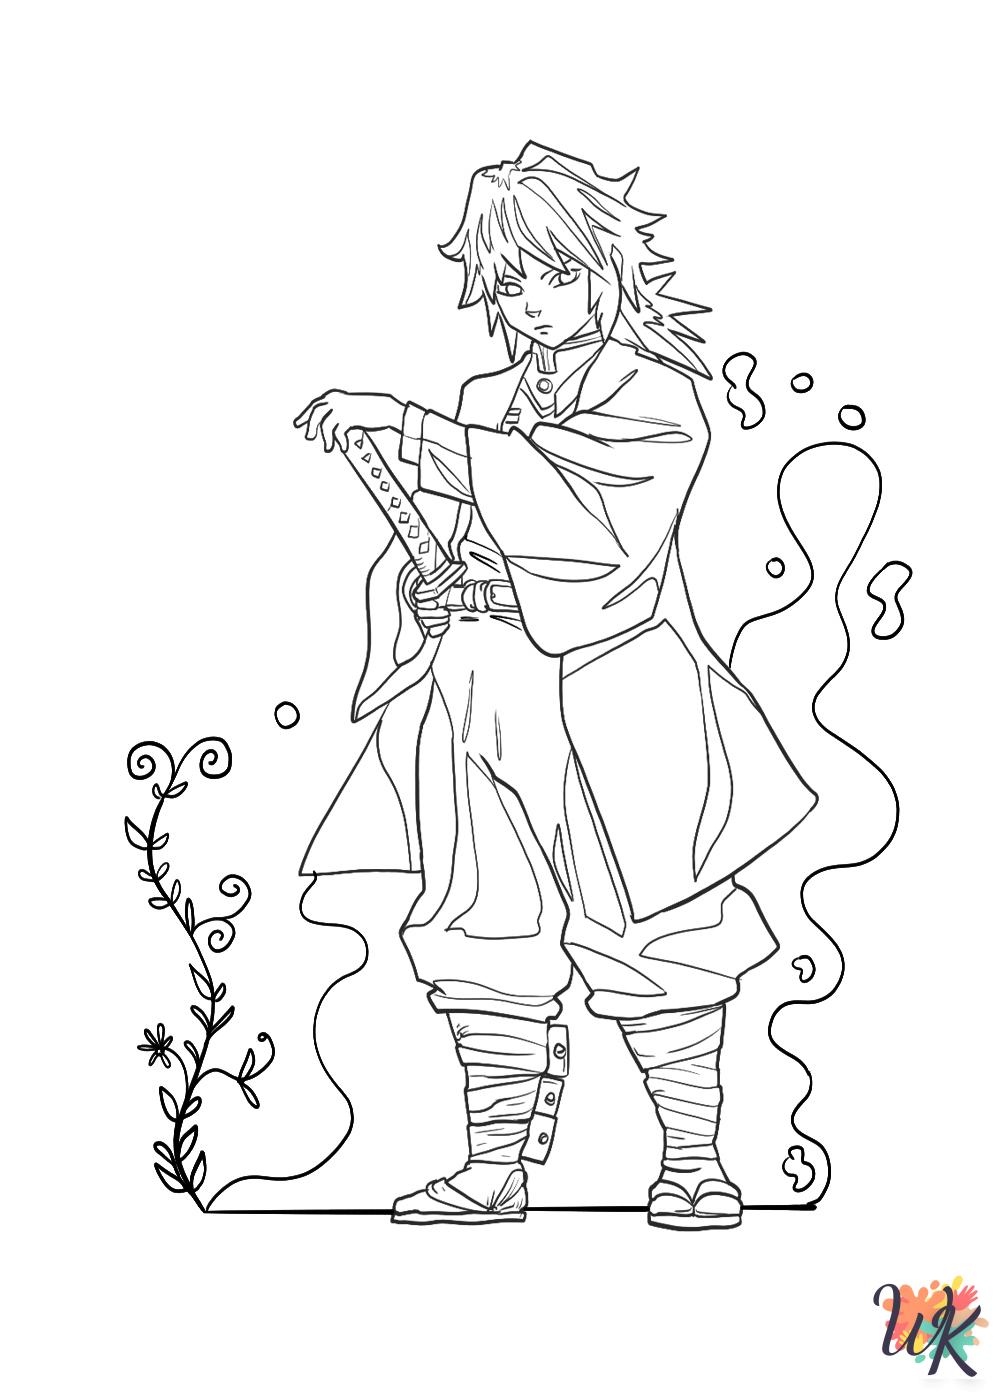 Demon Slayer coloring pages for adults pdf